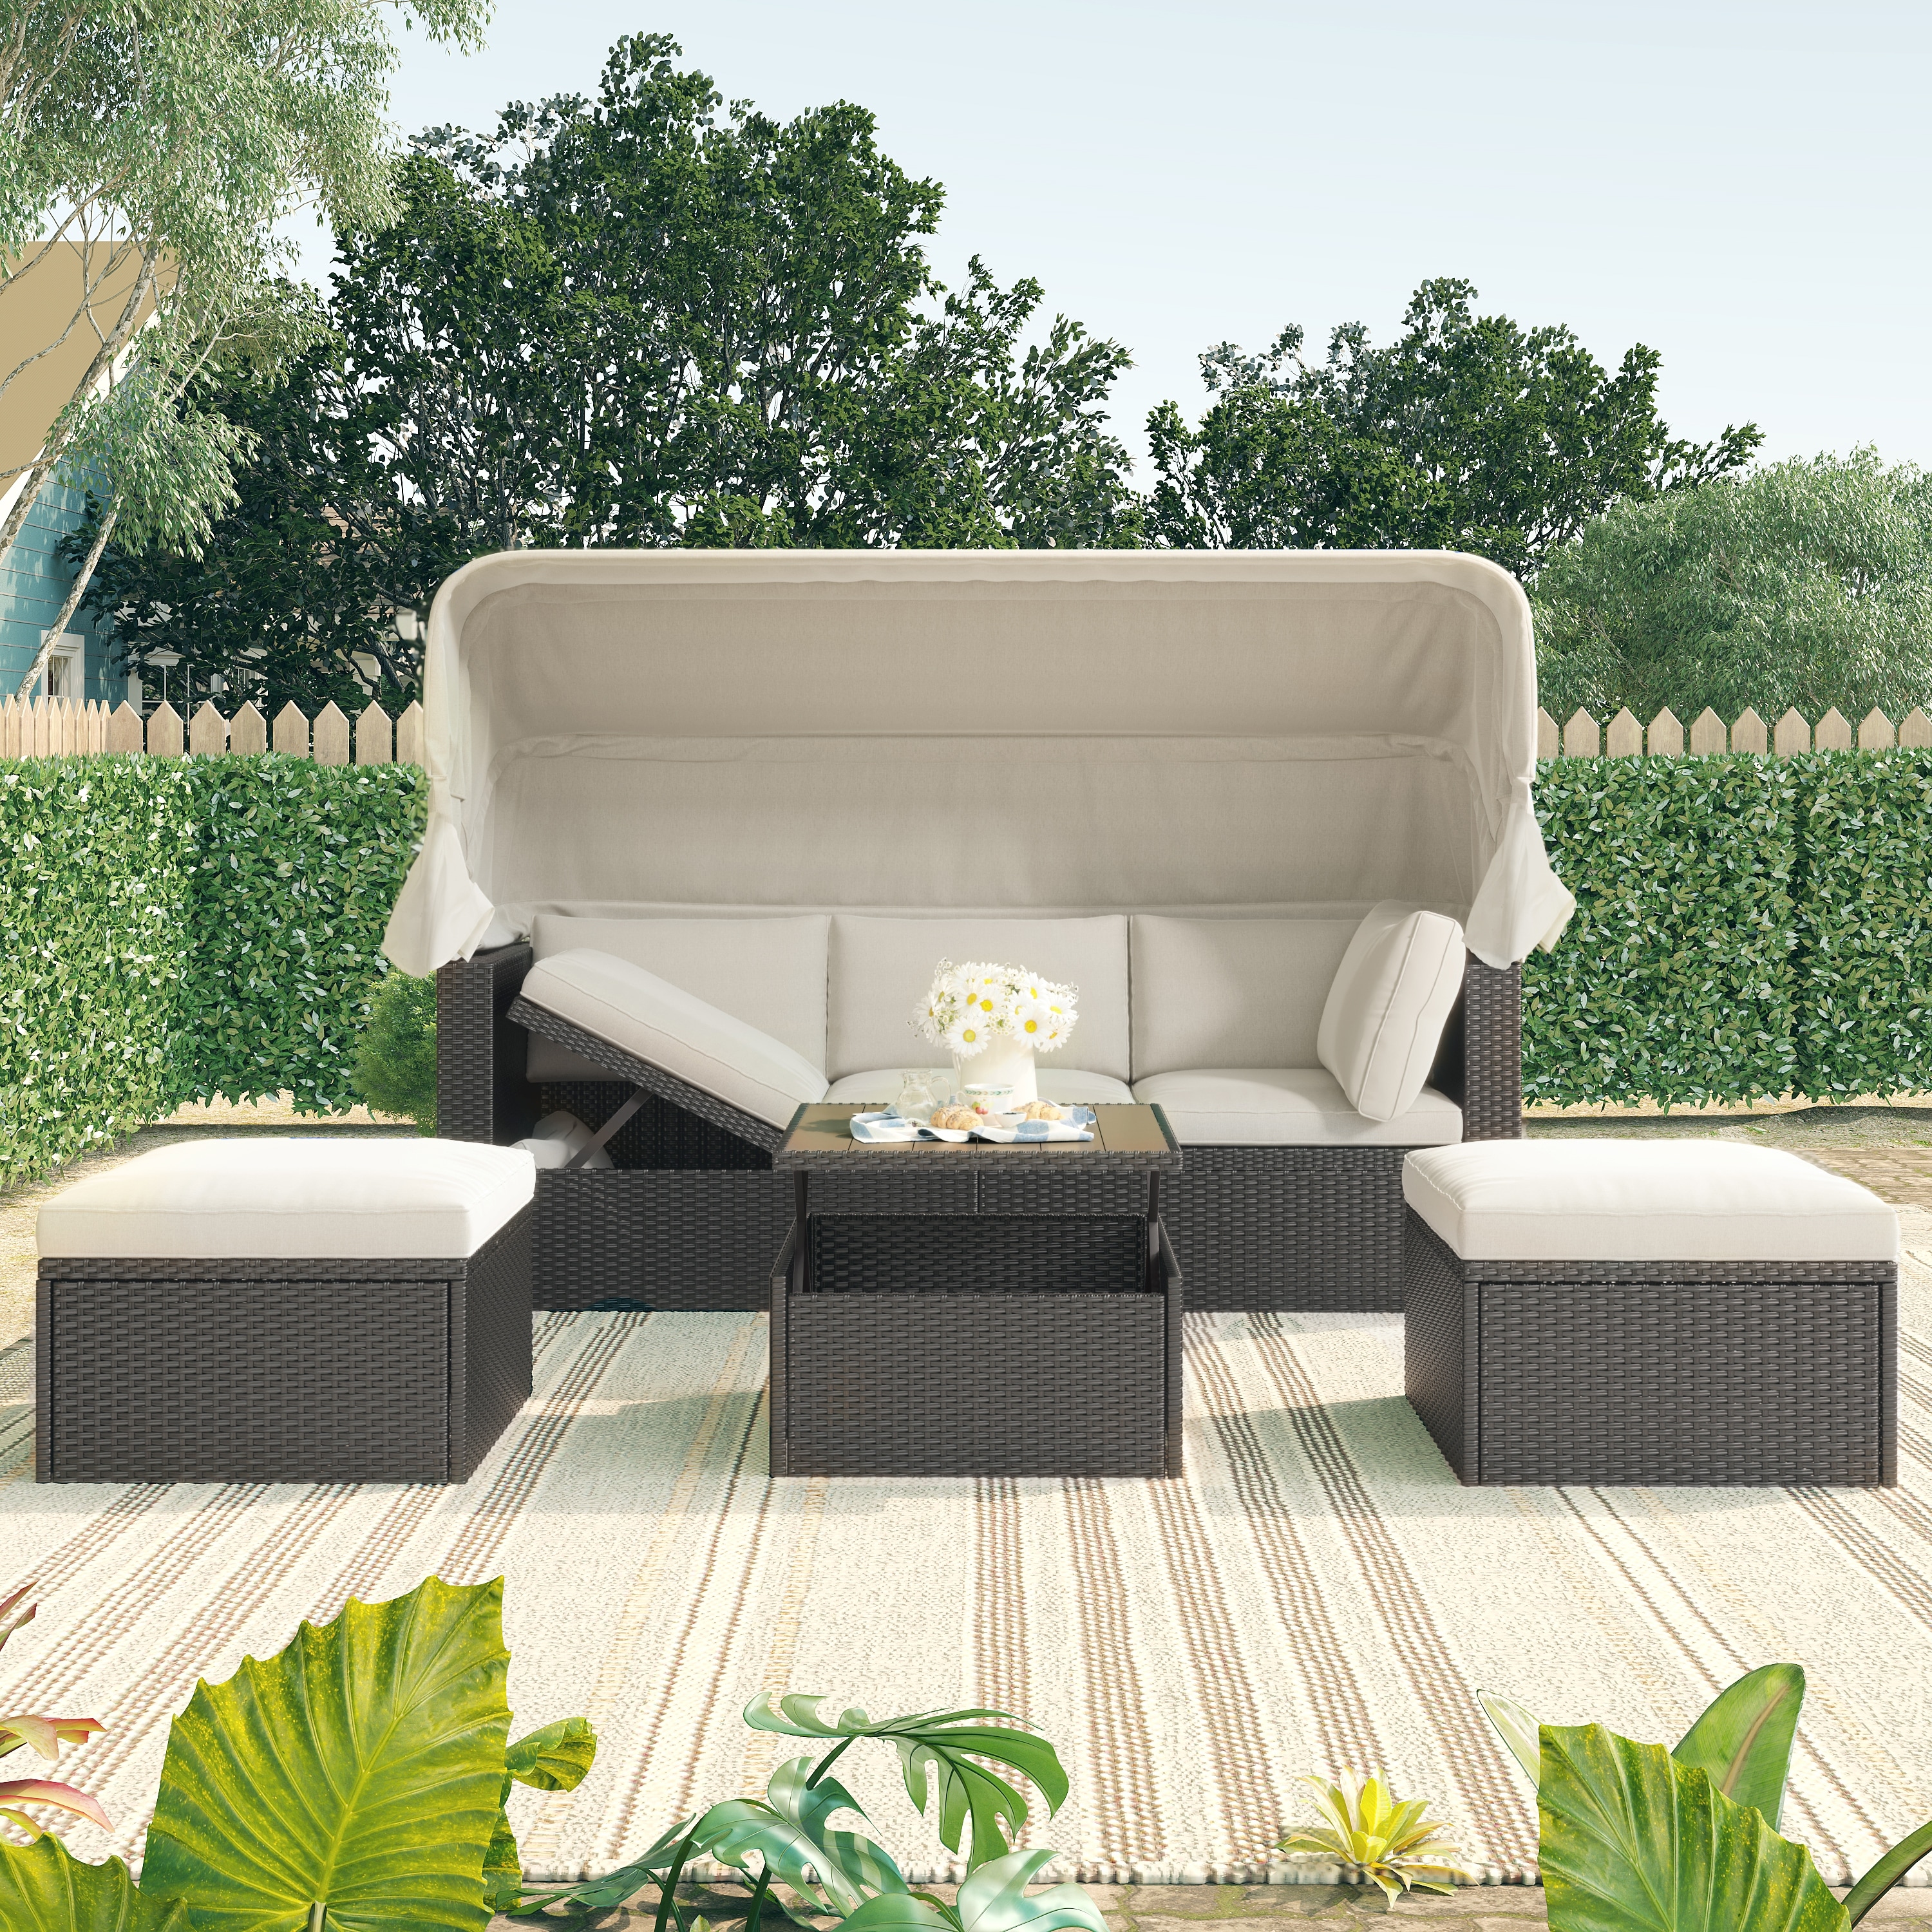 Outdoor Patio Rectangle Daybed With Retractable Canopy  Wicker Sectional Sofa